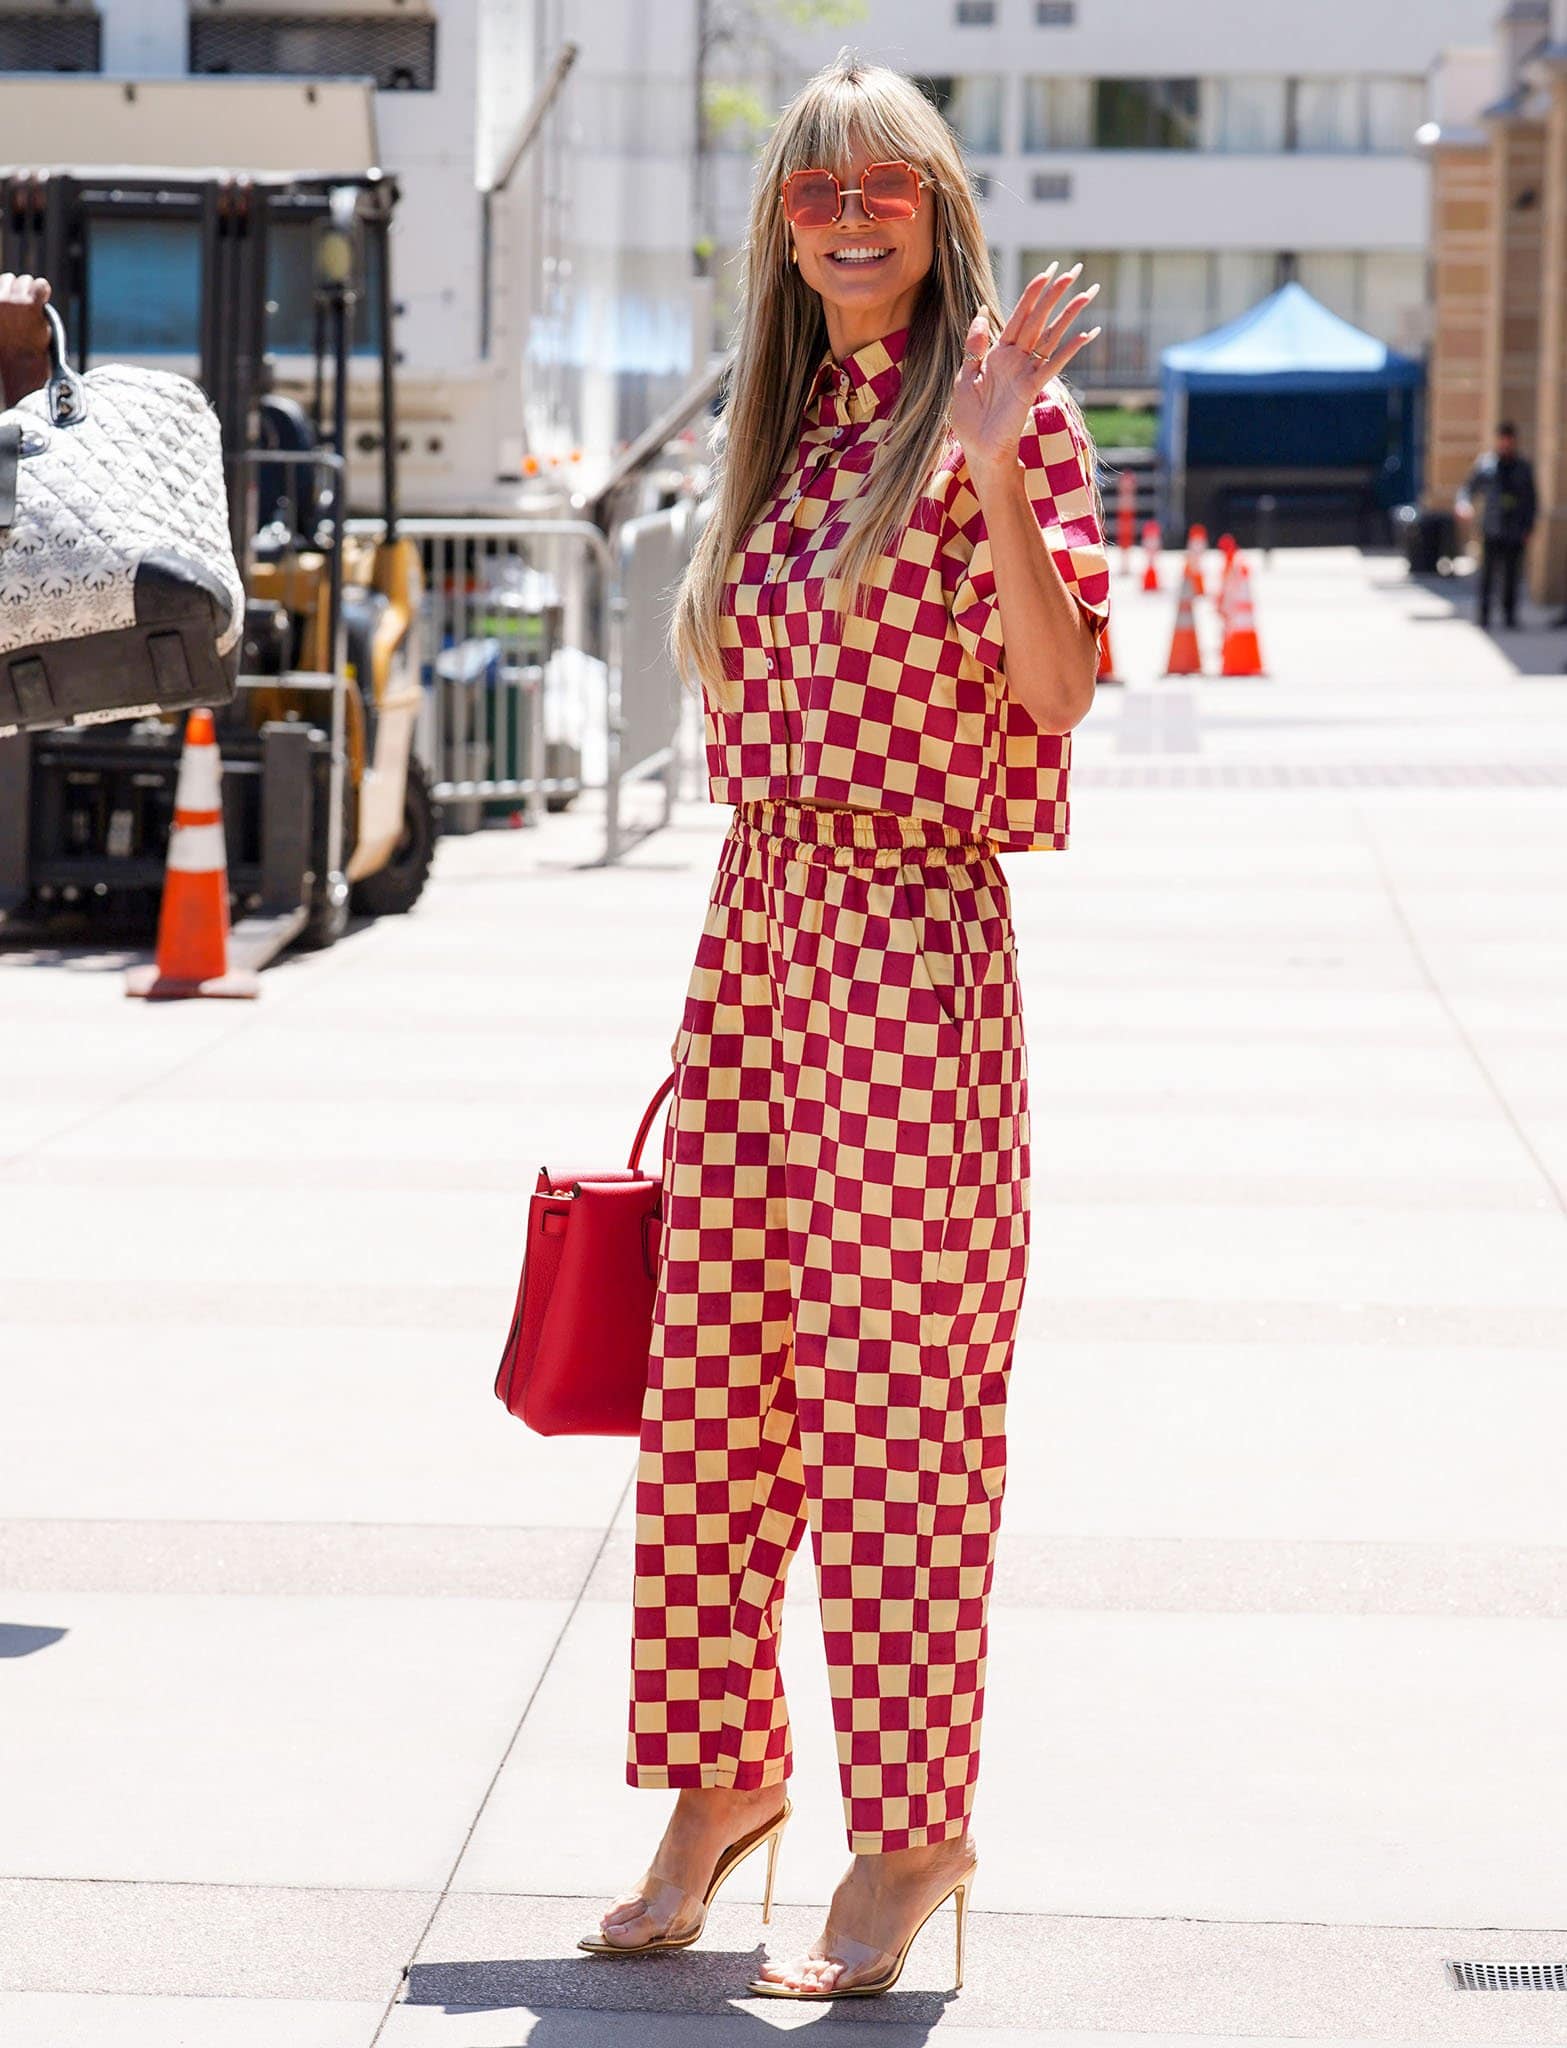 Heidi Klum channels '60s mod look in a red-and-cream checkerboard co-ord set on April 14, 2022